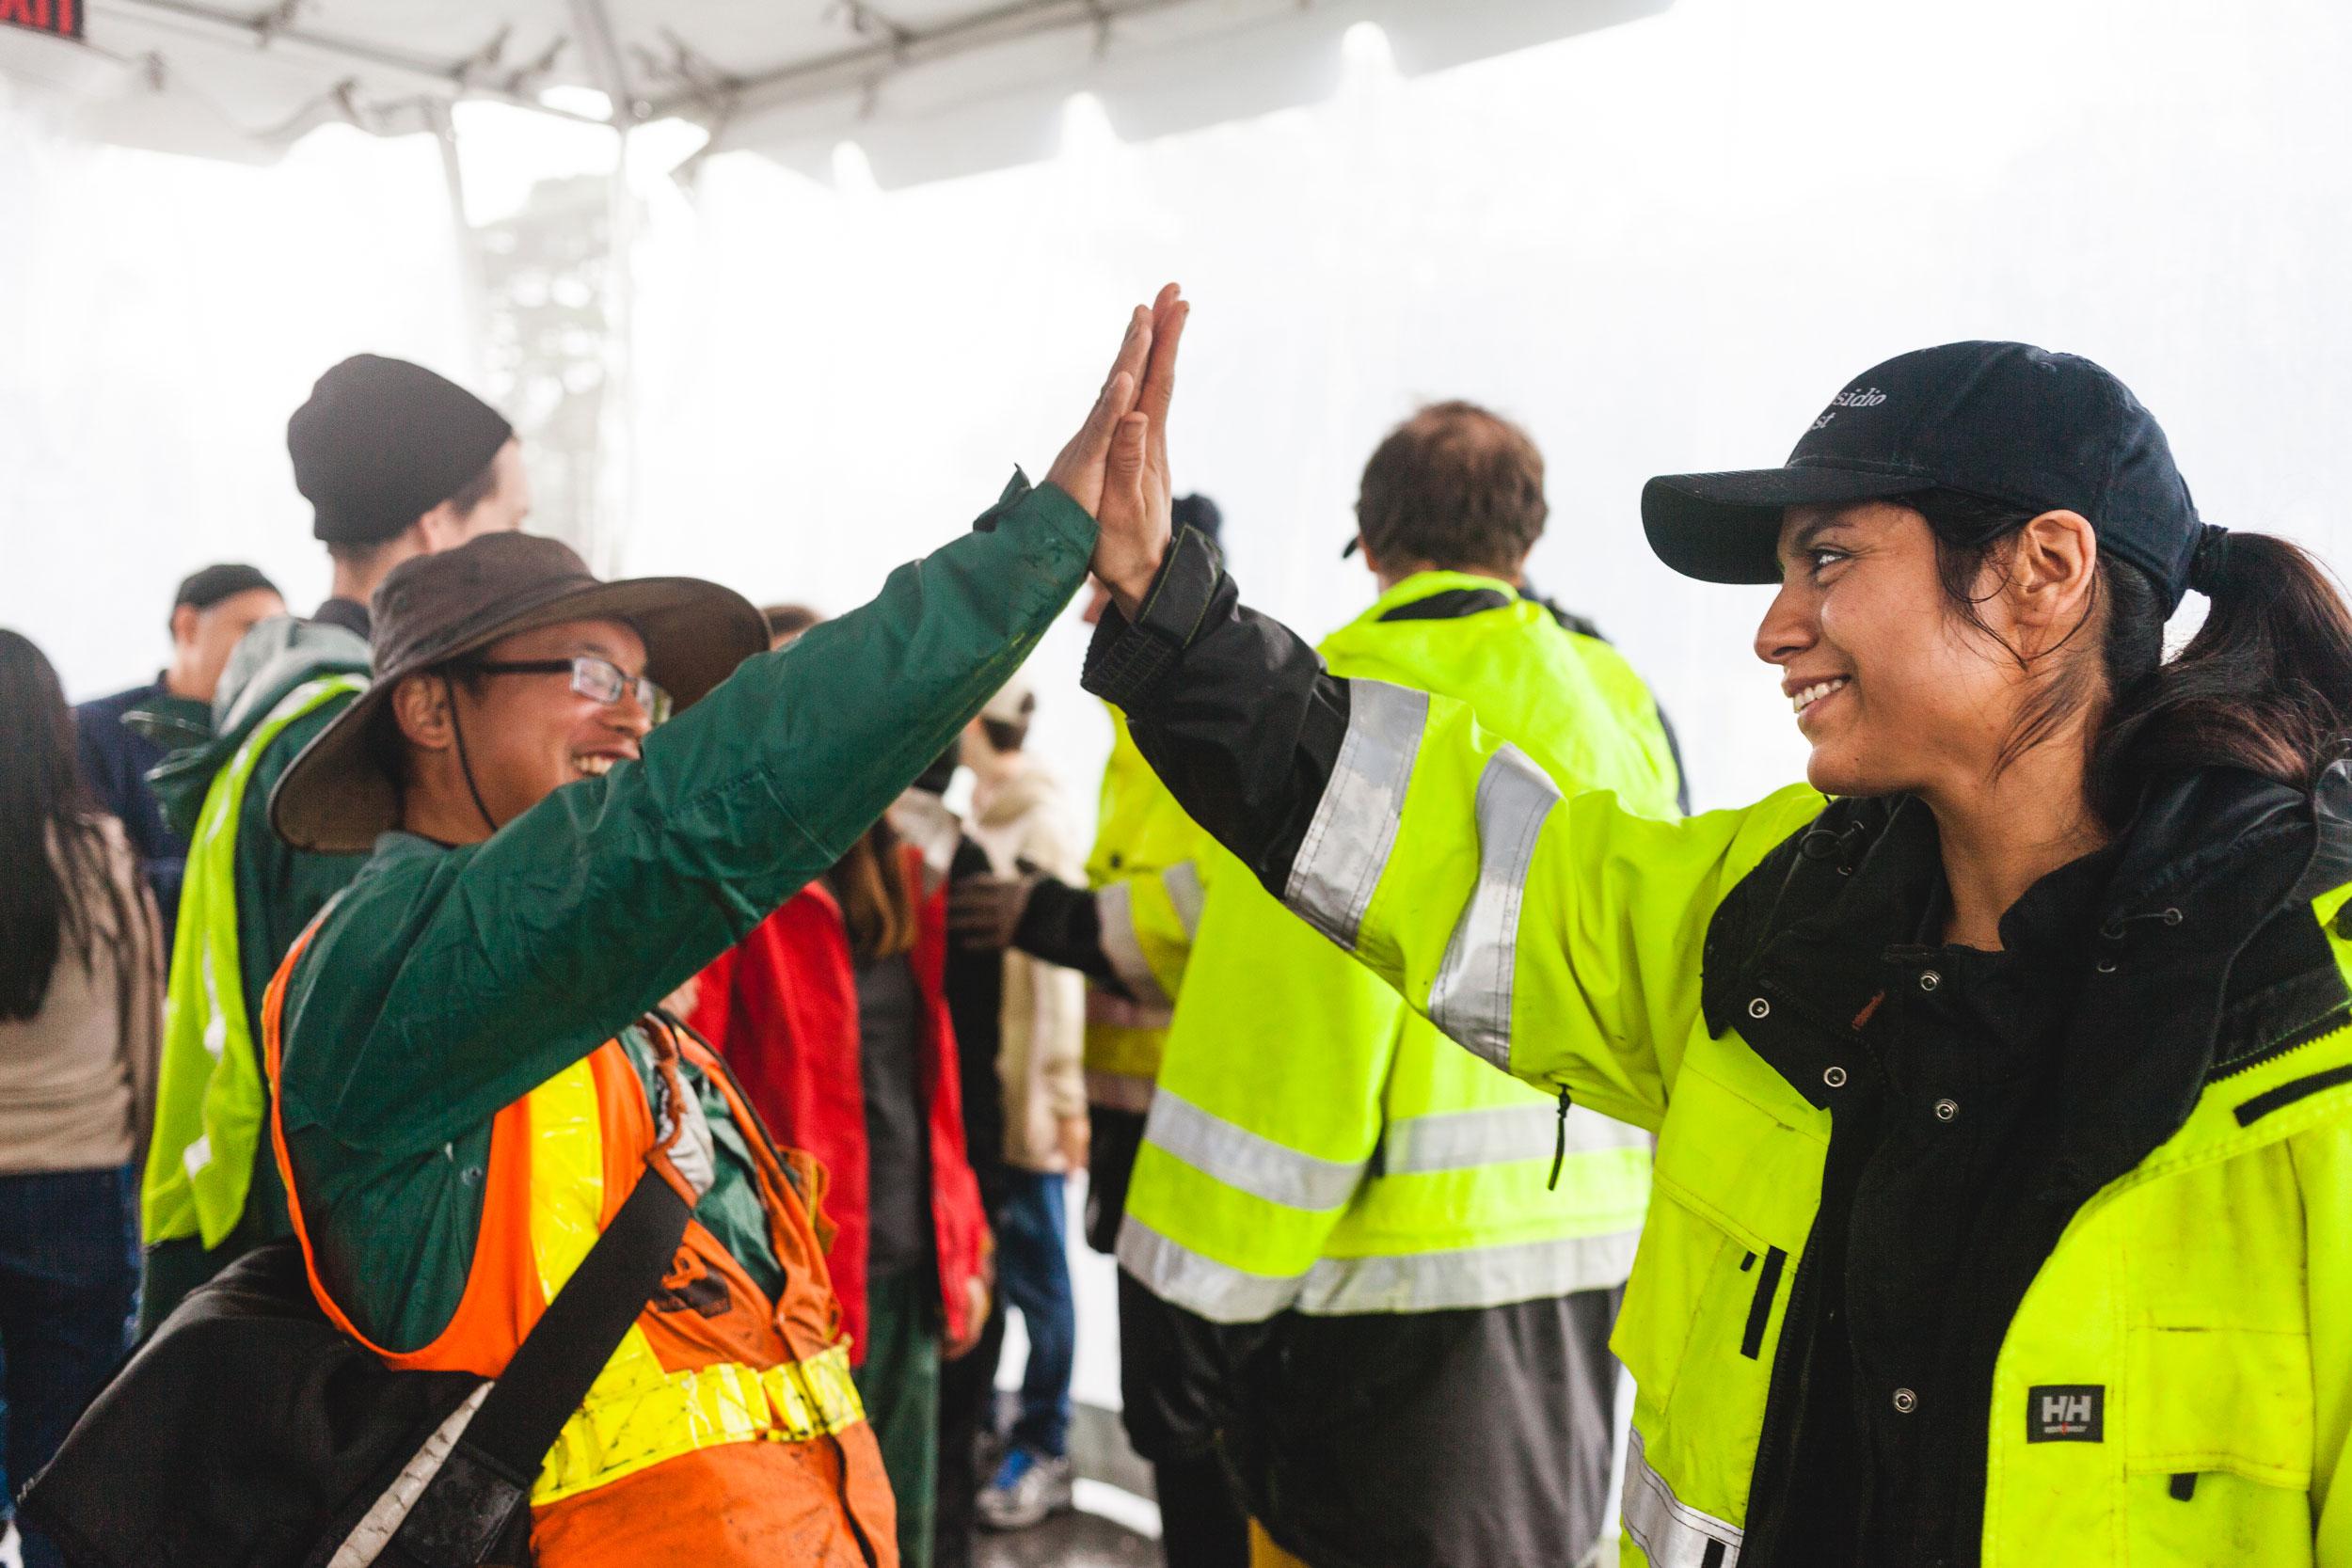 Man and woman in safety vests and jackets high-fiving